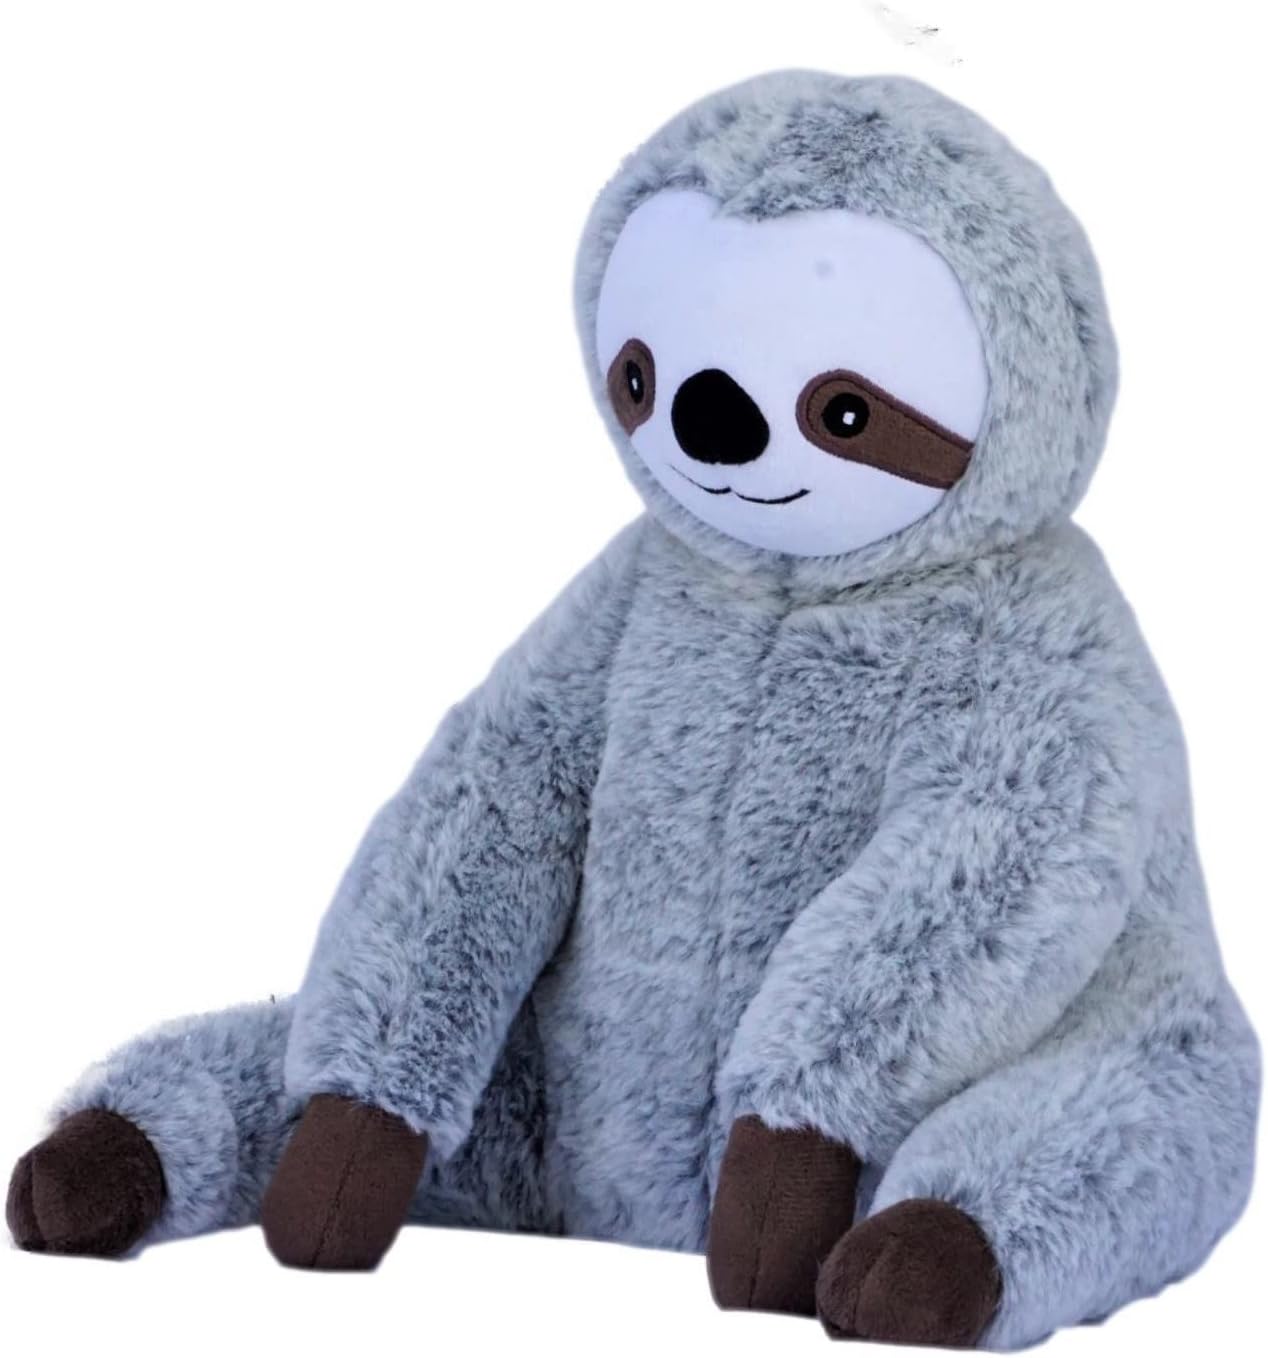 Sloth Weighted Stuffed Animal Plush Toy